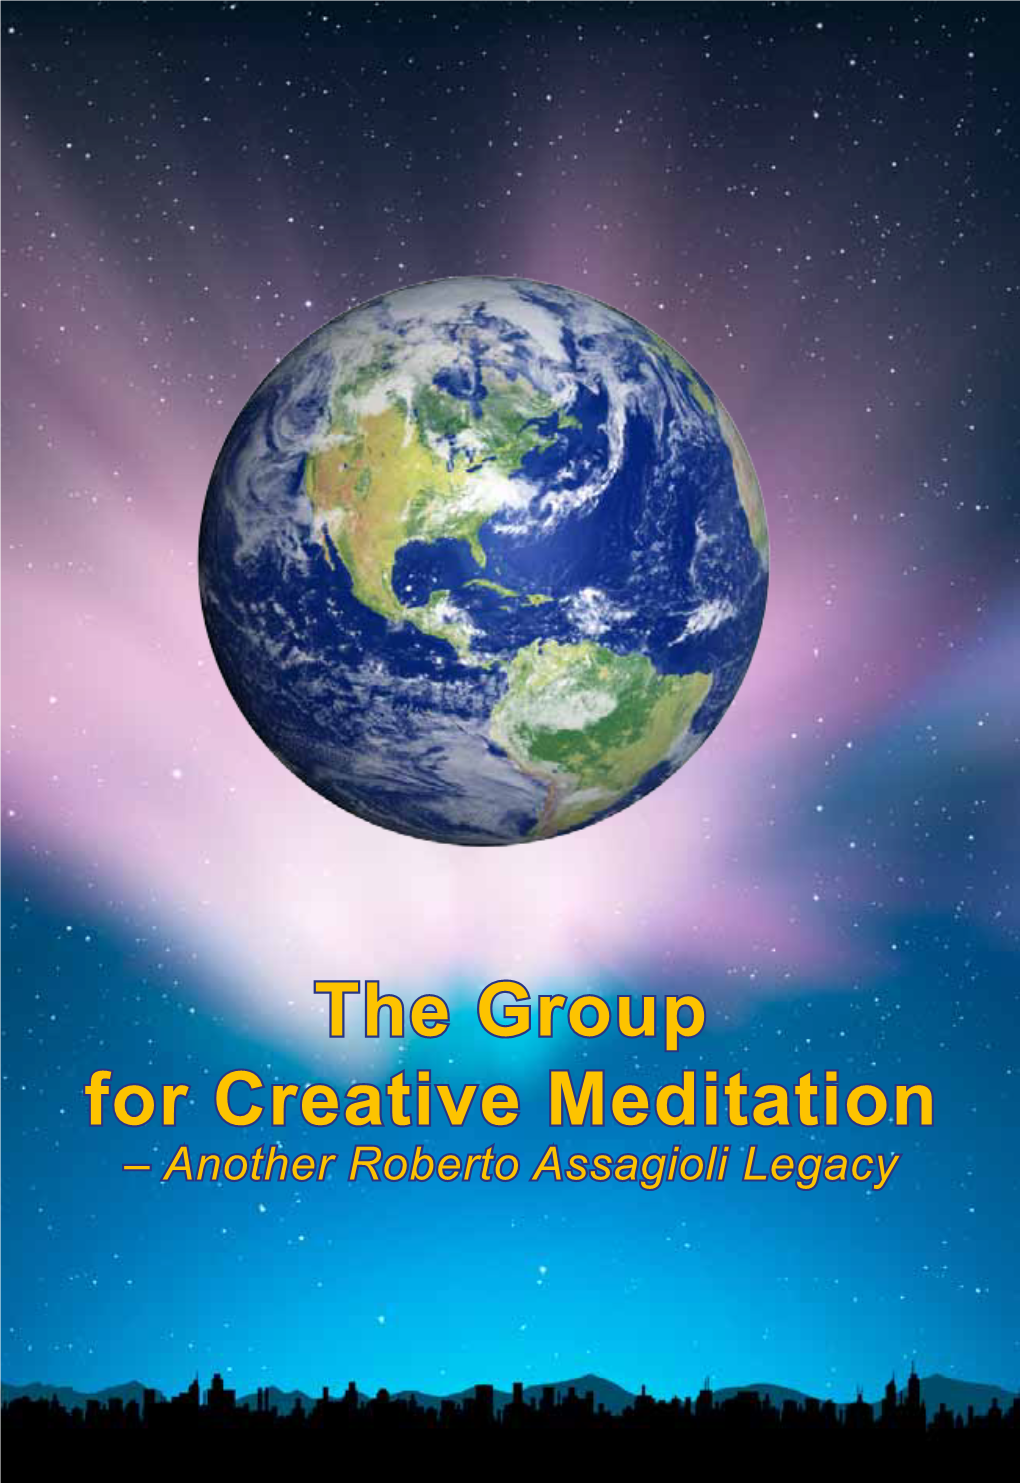 The Group for Creative Meditation